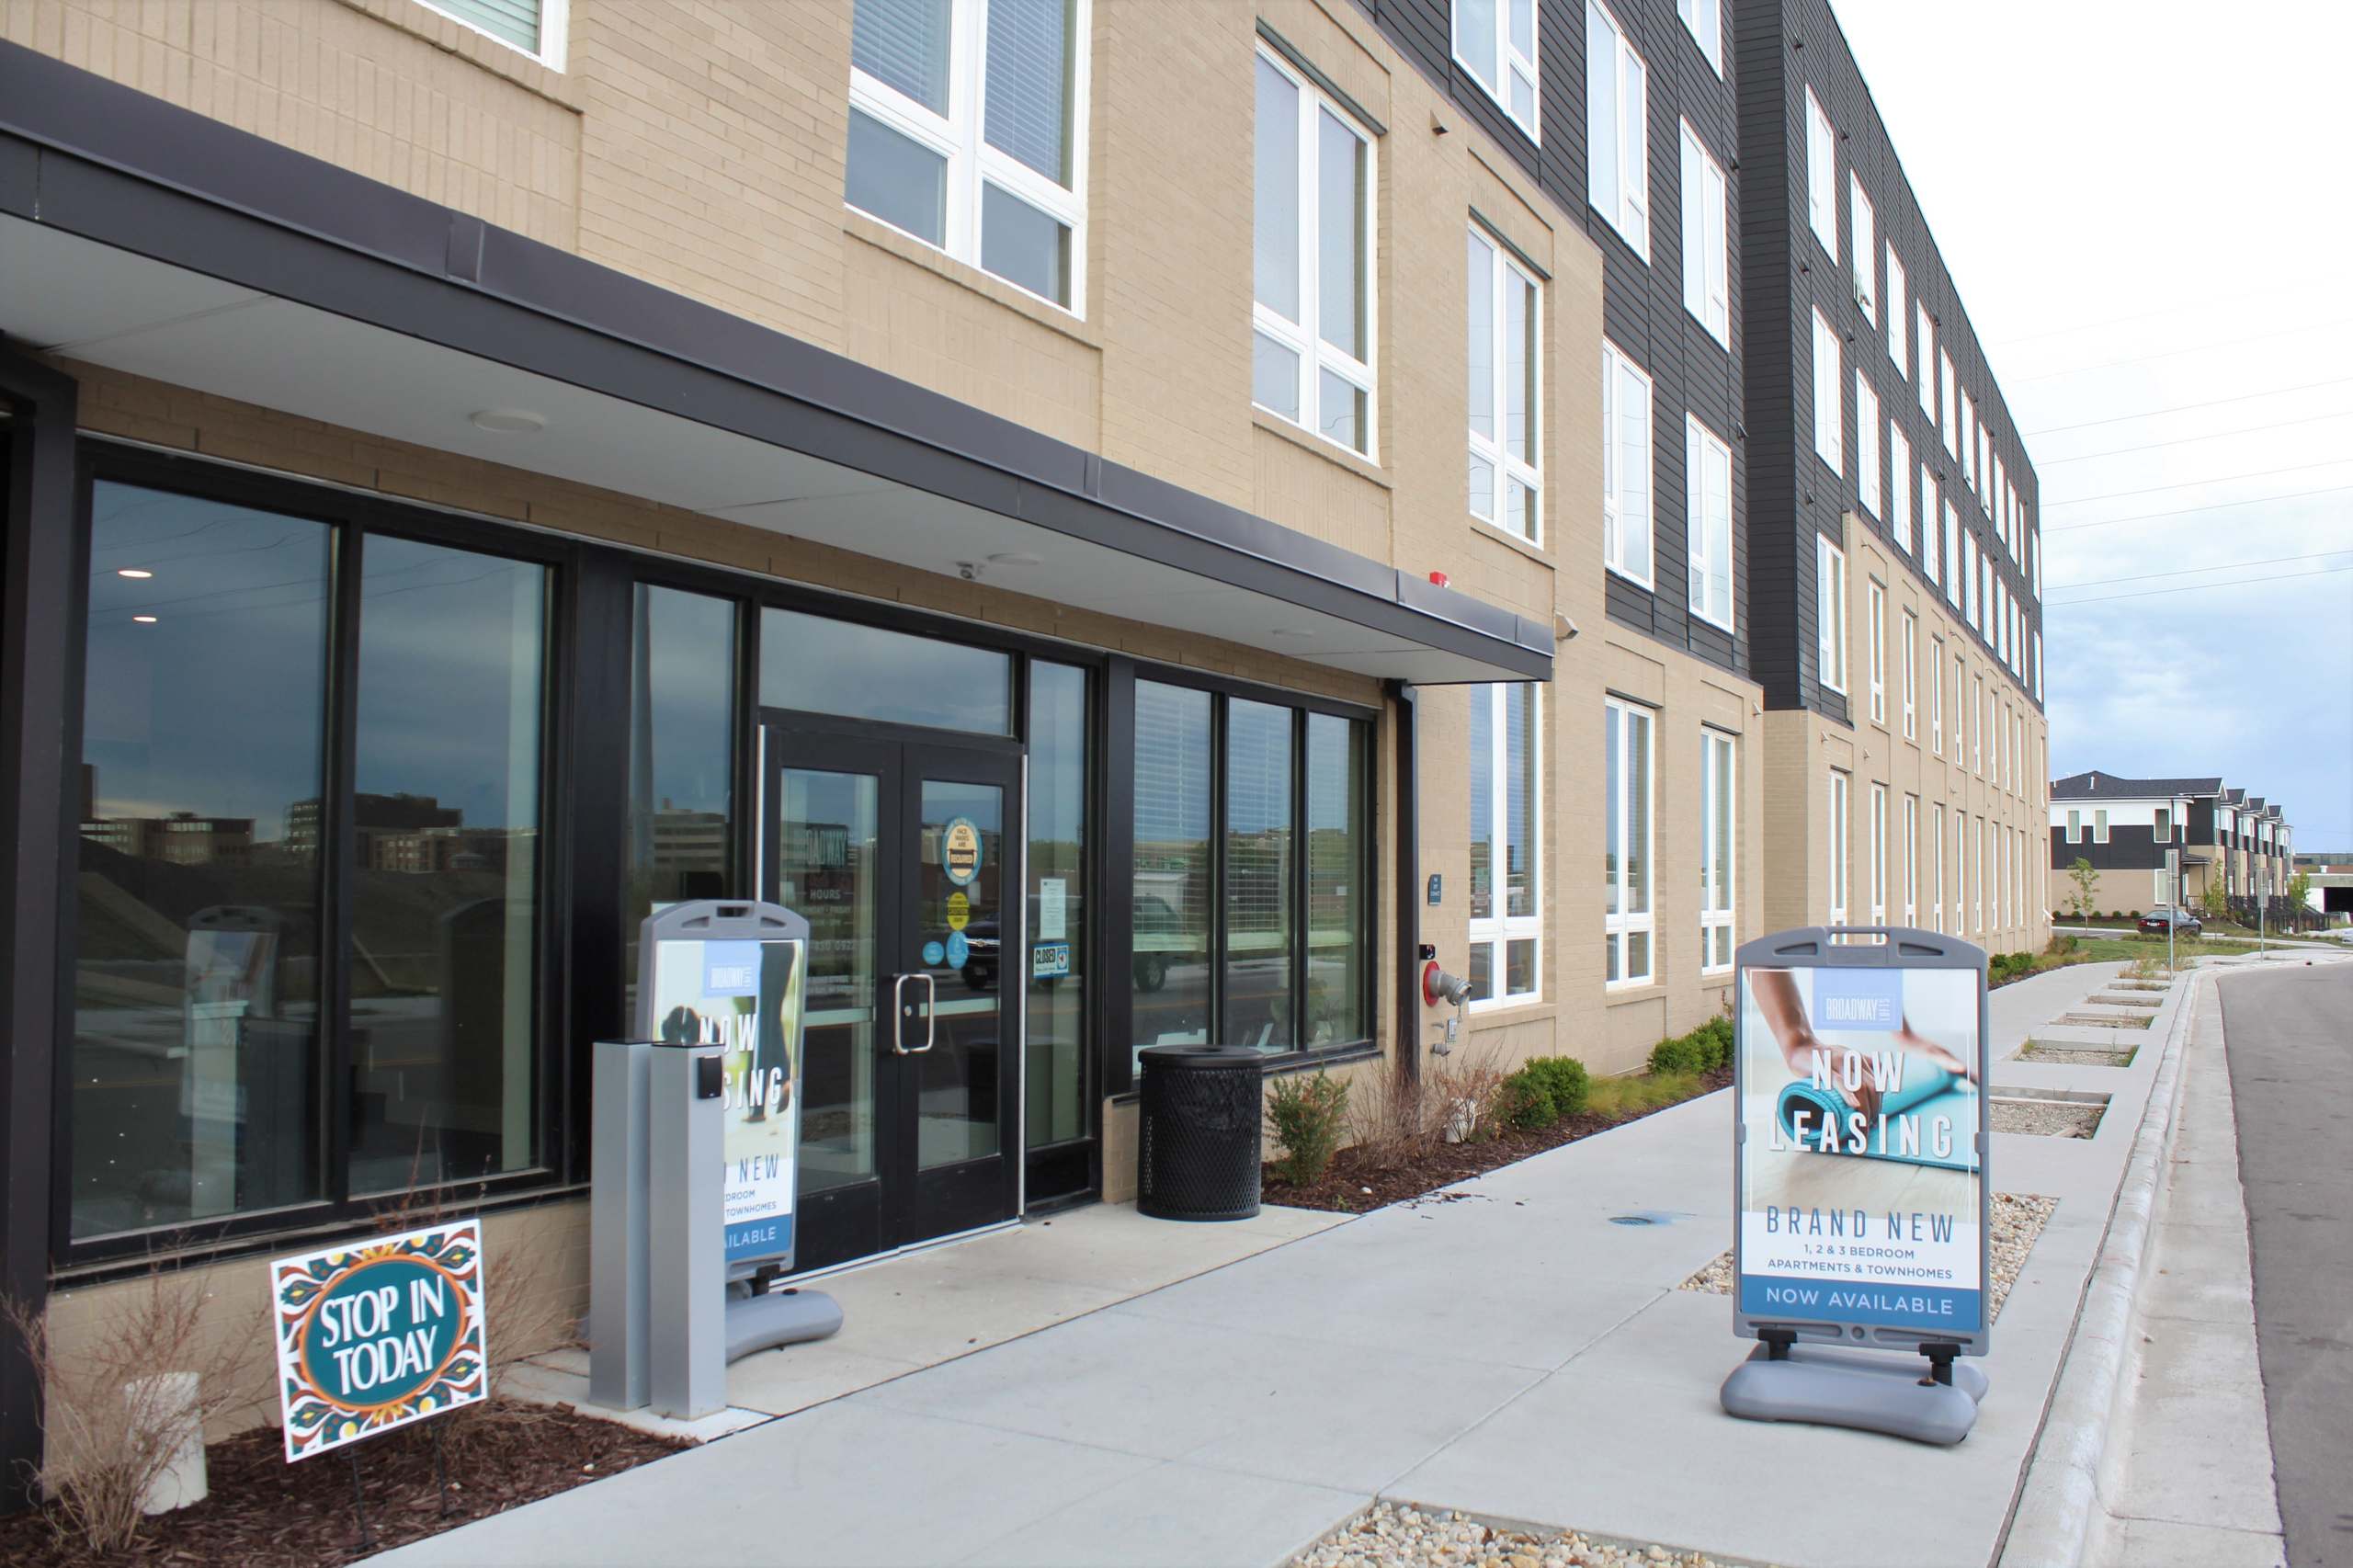 Signs advertise available apartments at Broadway Lofts in Green Bay